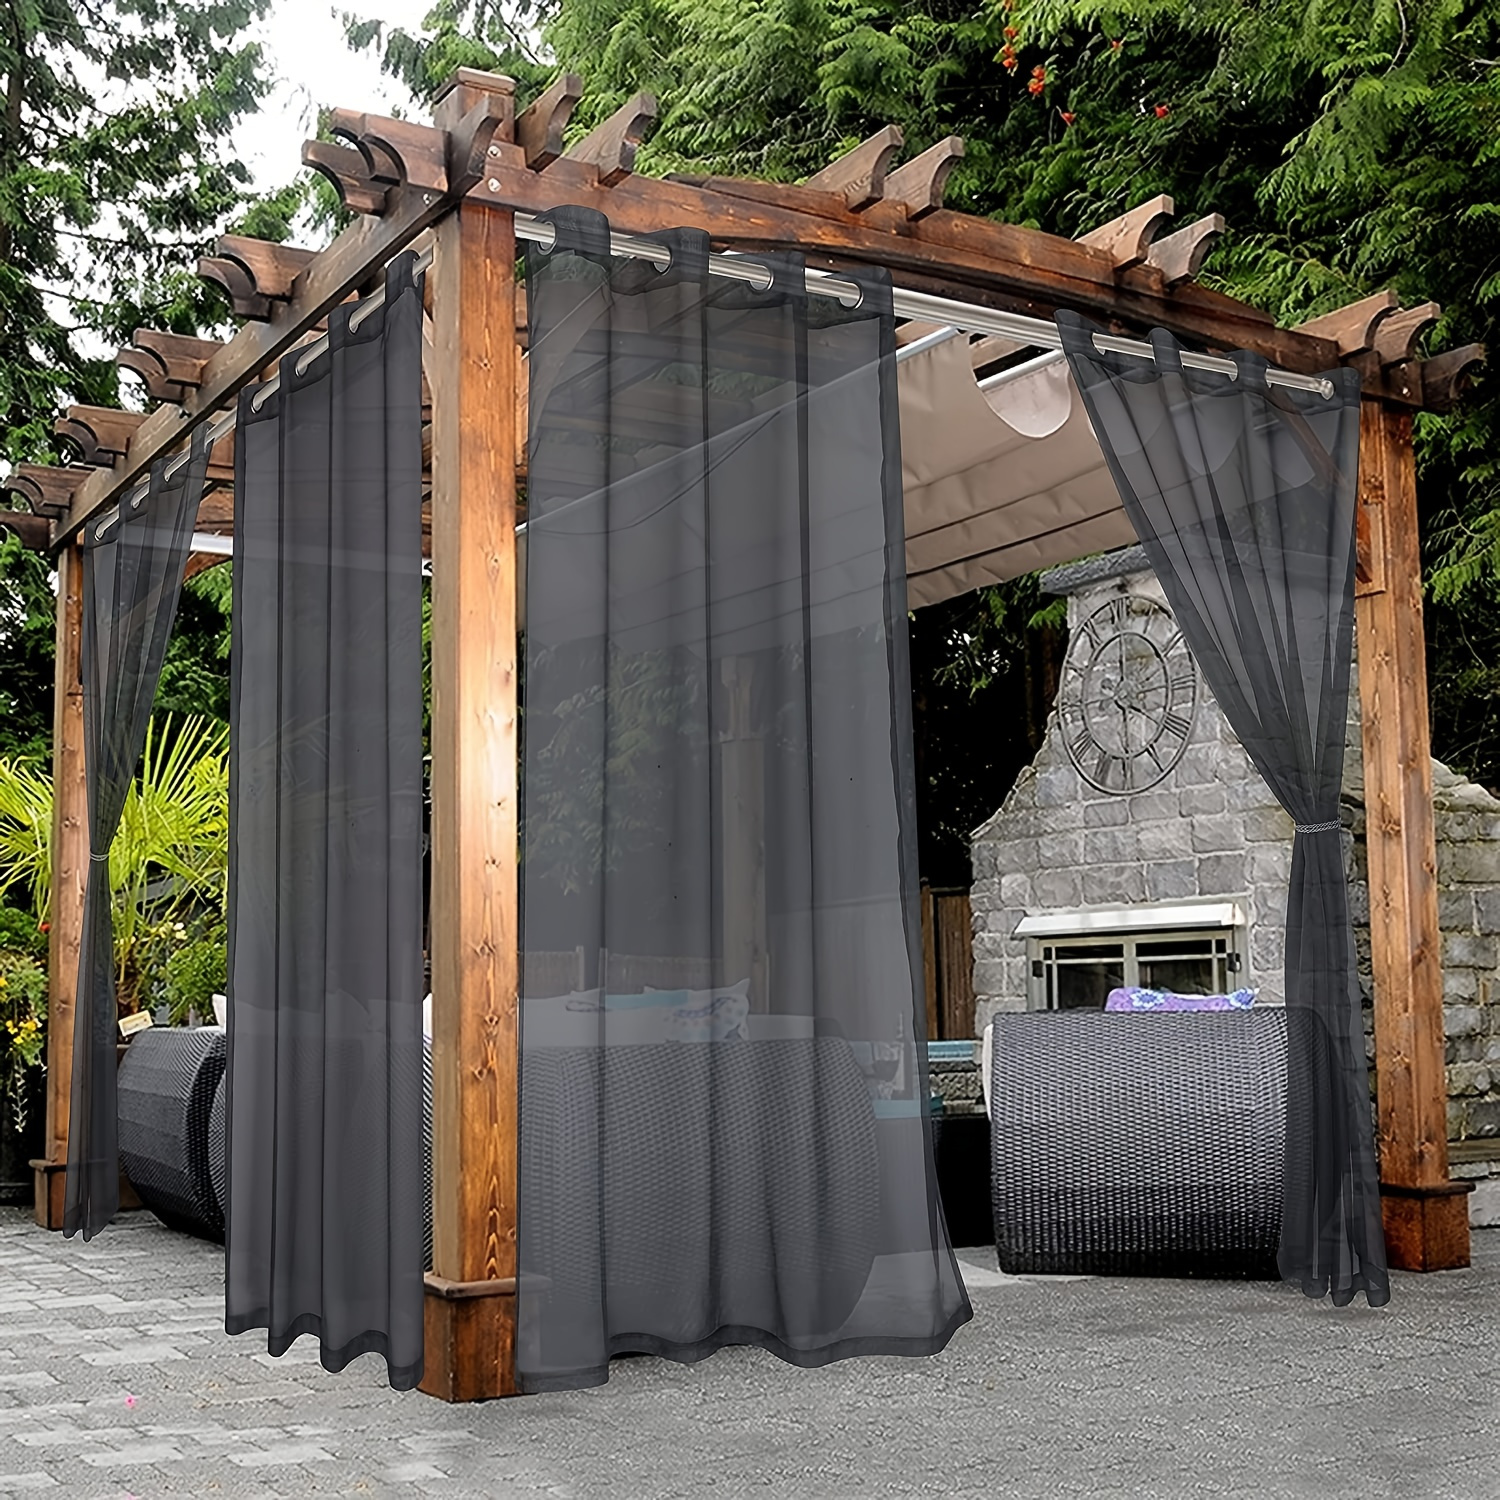 

1 Panel Waterproof Sheer Curtains 54*84in, Indoor/outdoor Curtains With Grommets, Curtains For Living Room, Bedroom, Pergola, Porch, Deck, And Cabana, Garden Decor